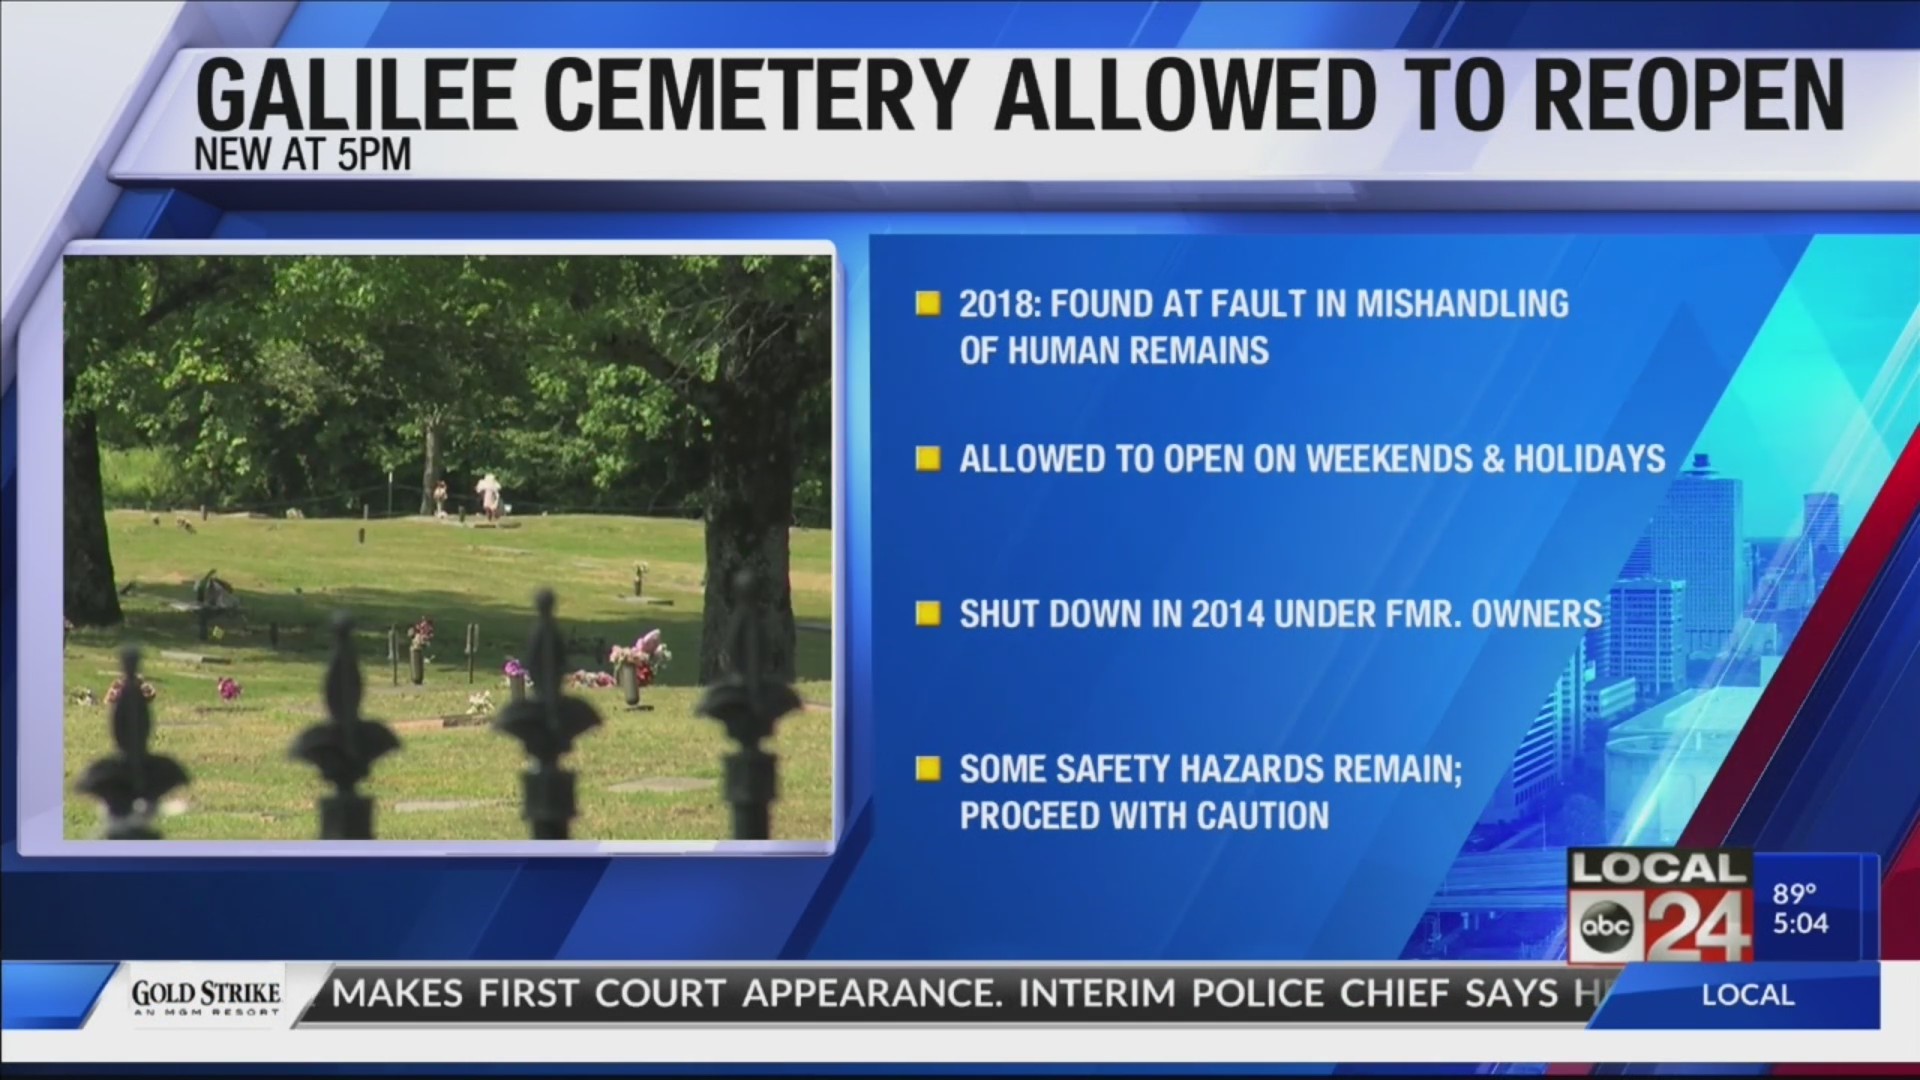 Court Approved Plan Allows Galilee Memorial Gardens Cemetery To